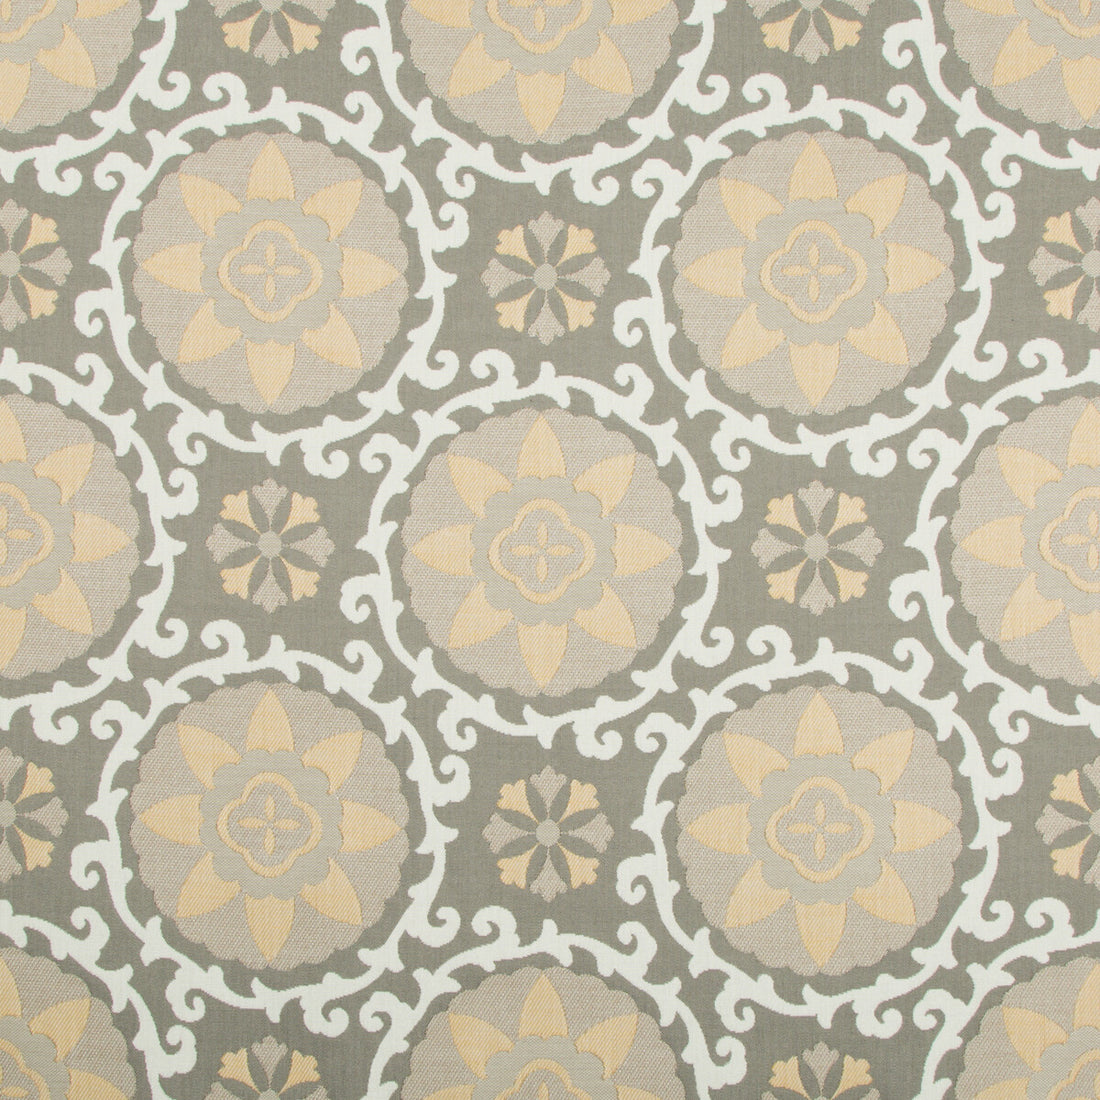 Exotic Suzani fabric in pebble color - pattern 31969.416.0 - by Kravet Design in the Oceania Indoor Outdoor collection